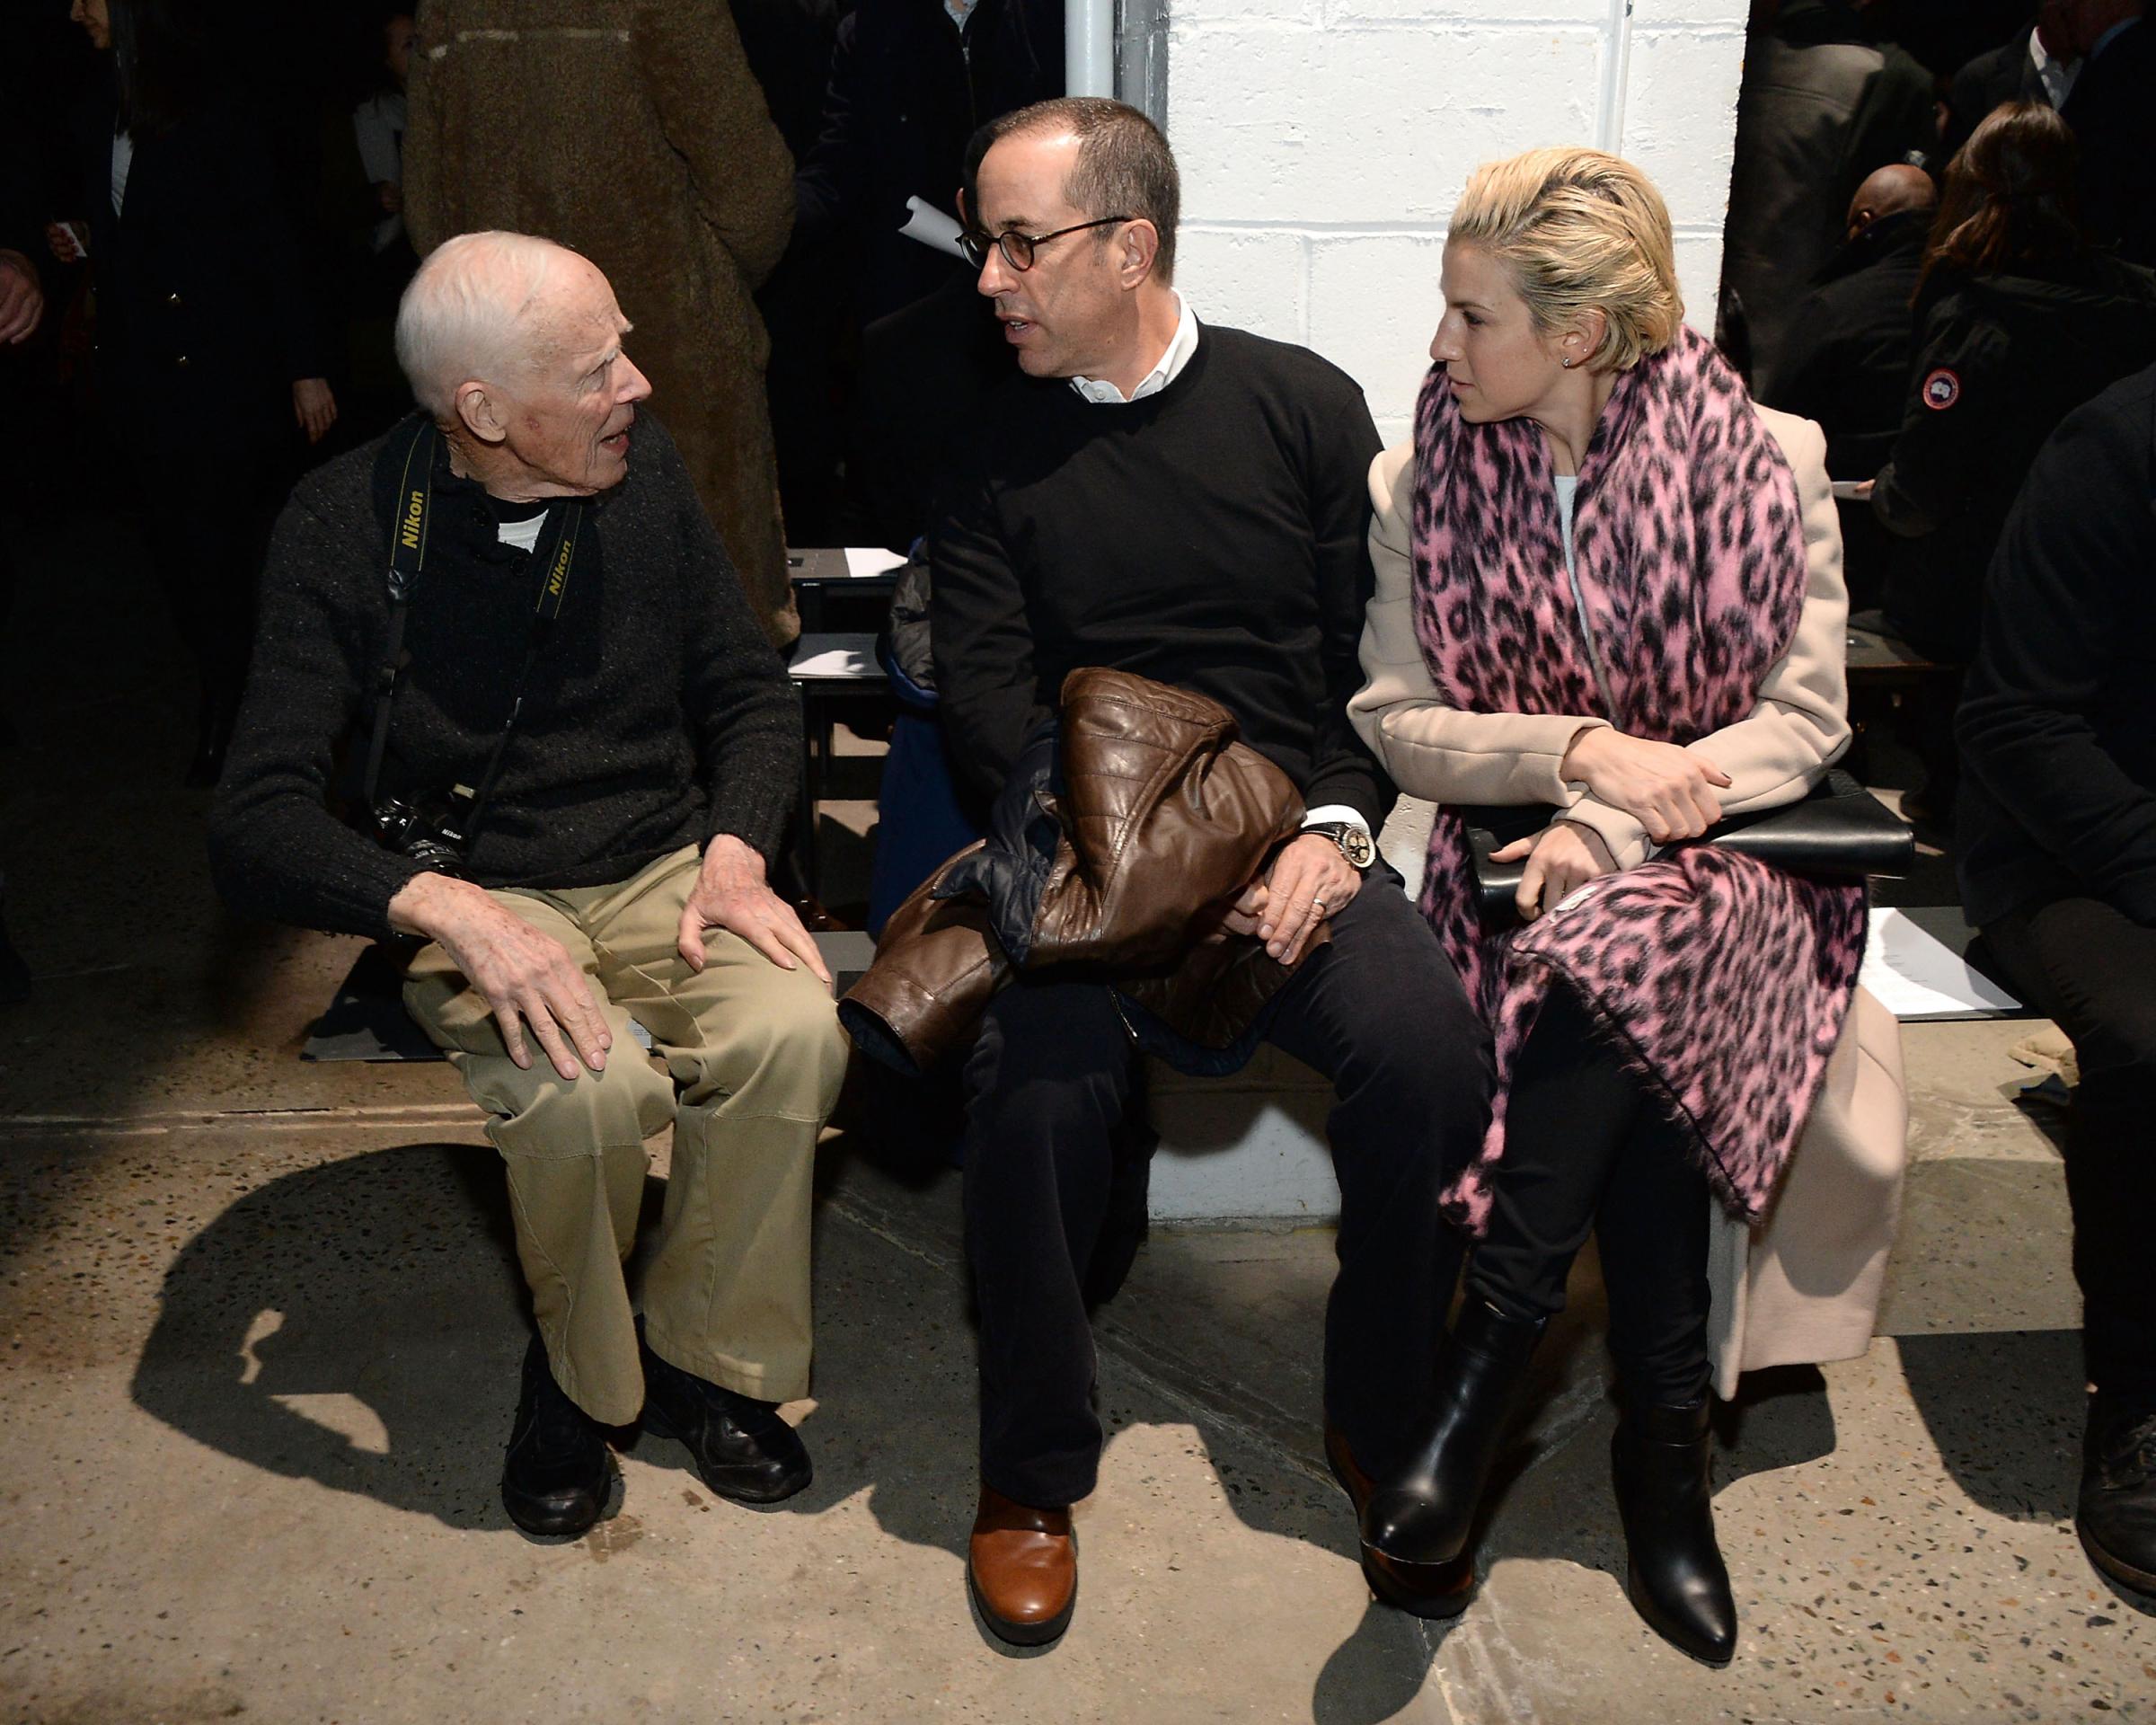 Bill Cunningham, Jerry Seinfeld and Jessica Seinfeld attend the Narciso Rodriguez fashion show during Mercedes-Benz Fashion Week Fall 2015 at SIR Stage37 in New York City on February 17, 2015.